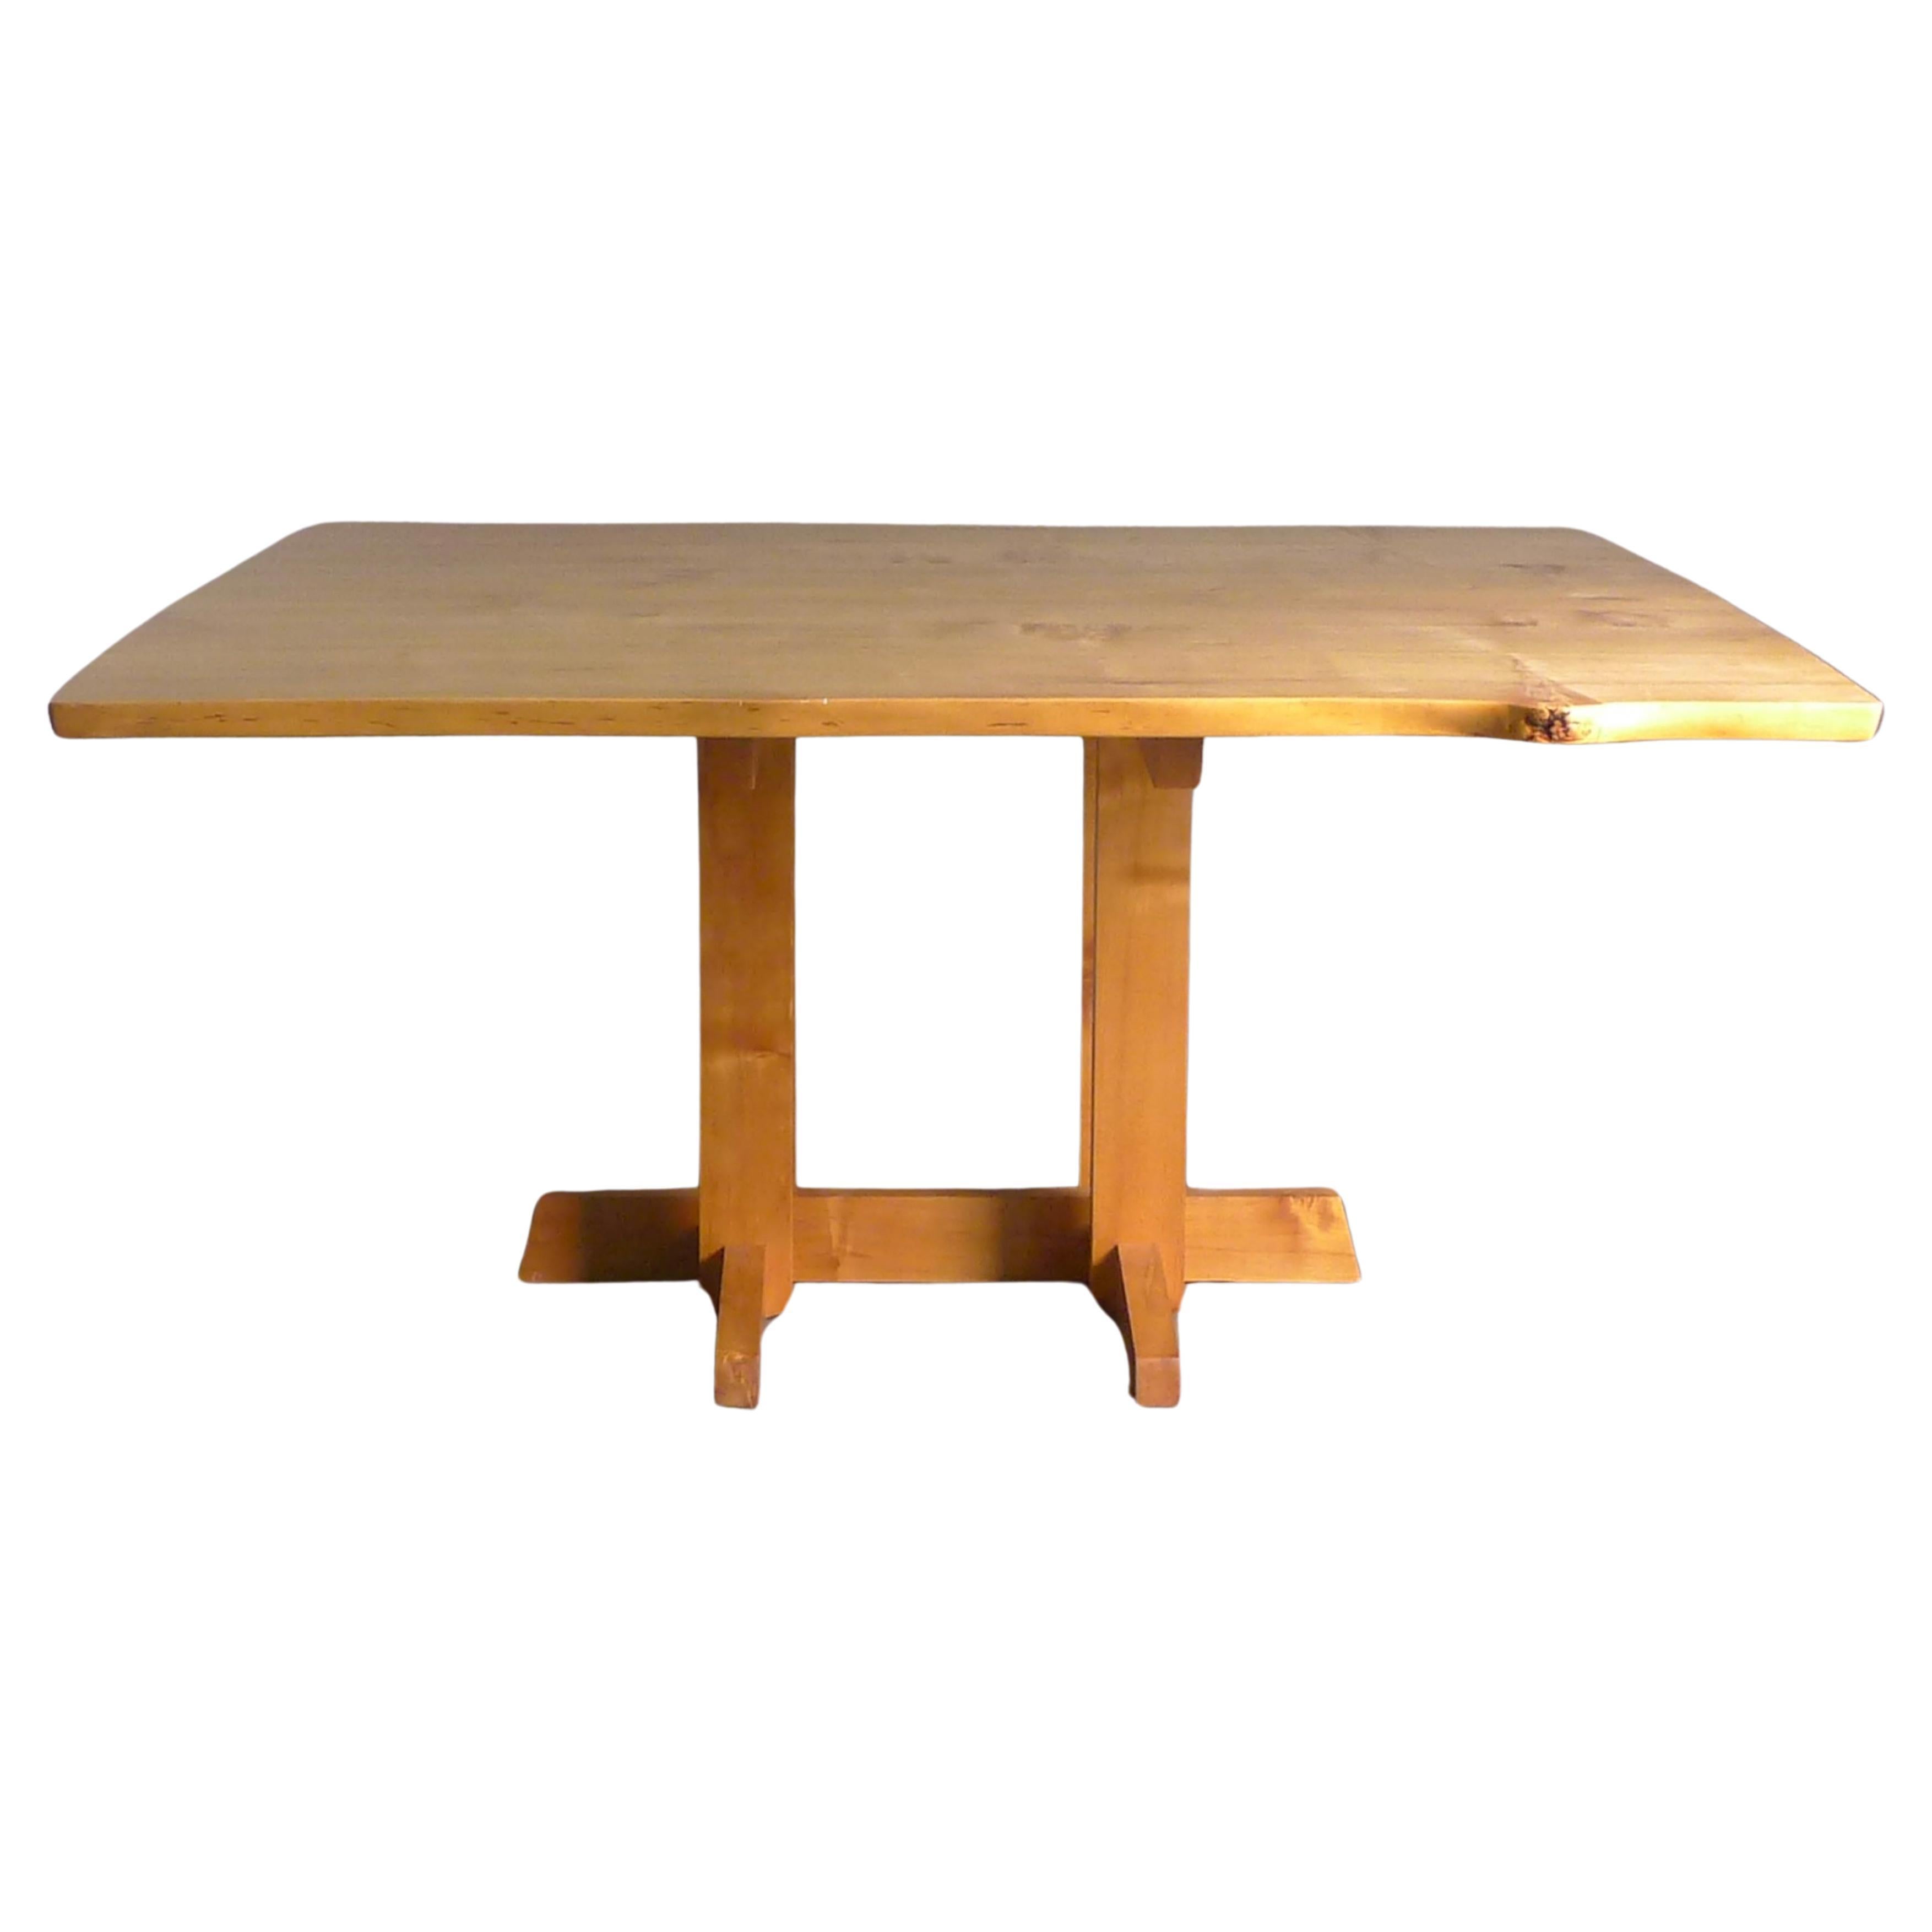 George Nakashima, Maple Frenchman's Cove Dining Table, signed and dated 1980